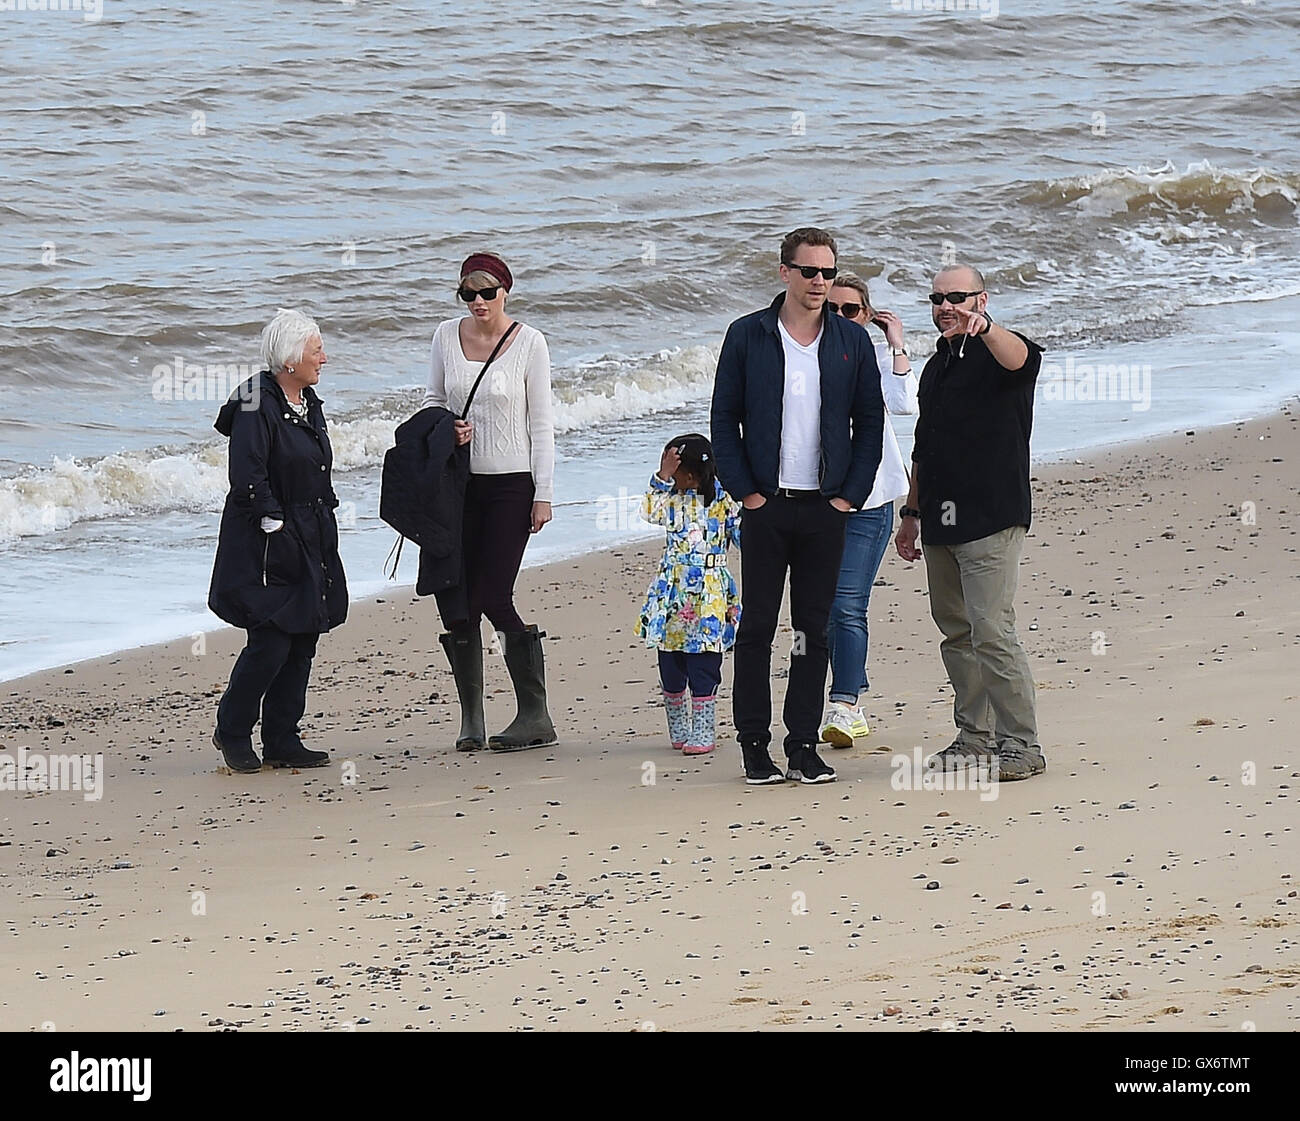 Taylor Swift and new boyfriend Tom Hiddleston enjoy a romantic walk on the  beach near Lowestoft in Suffolk, England. The couple were joined by Tom's  mother and some other friends. After 2